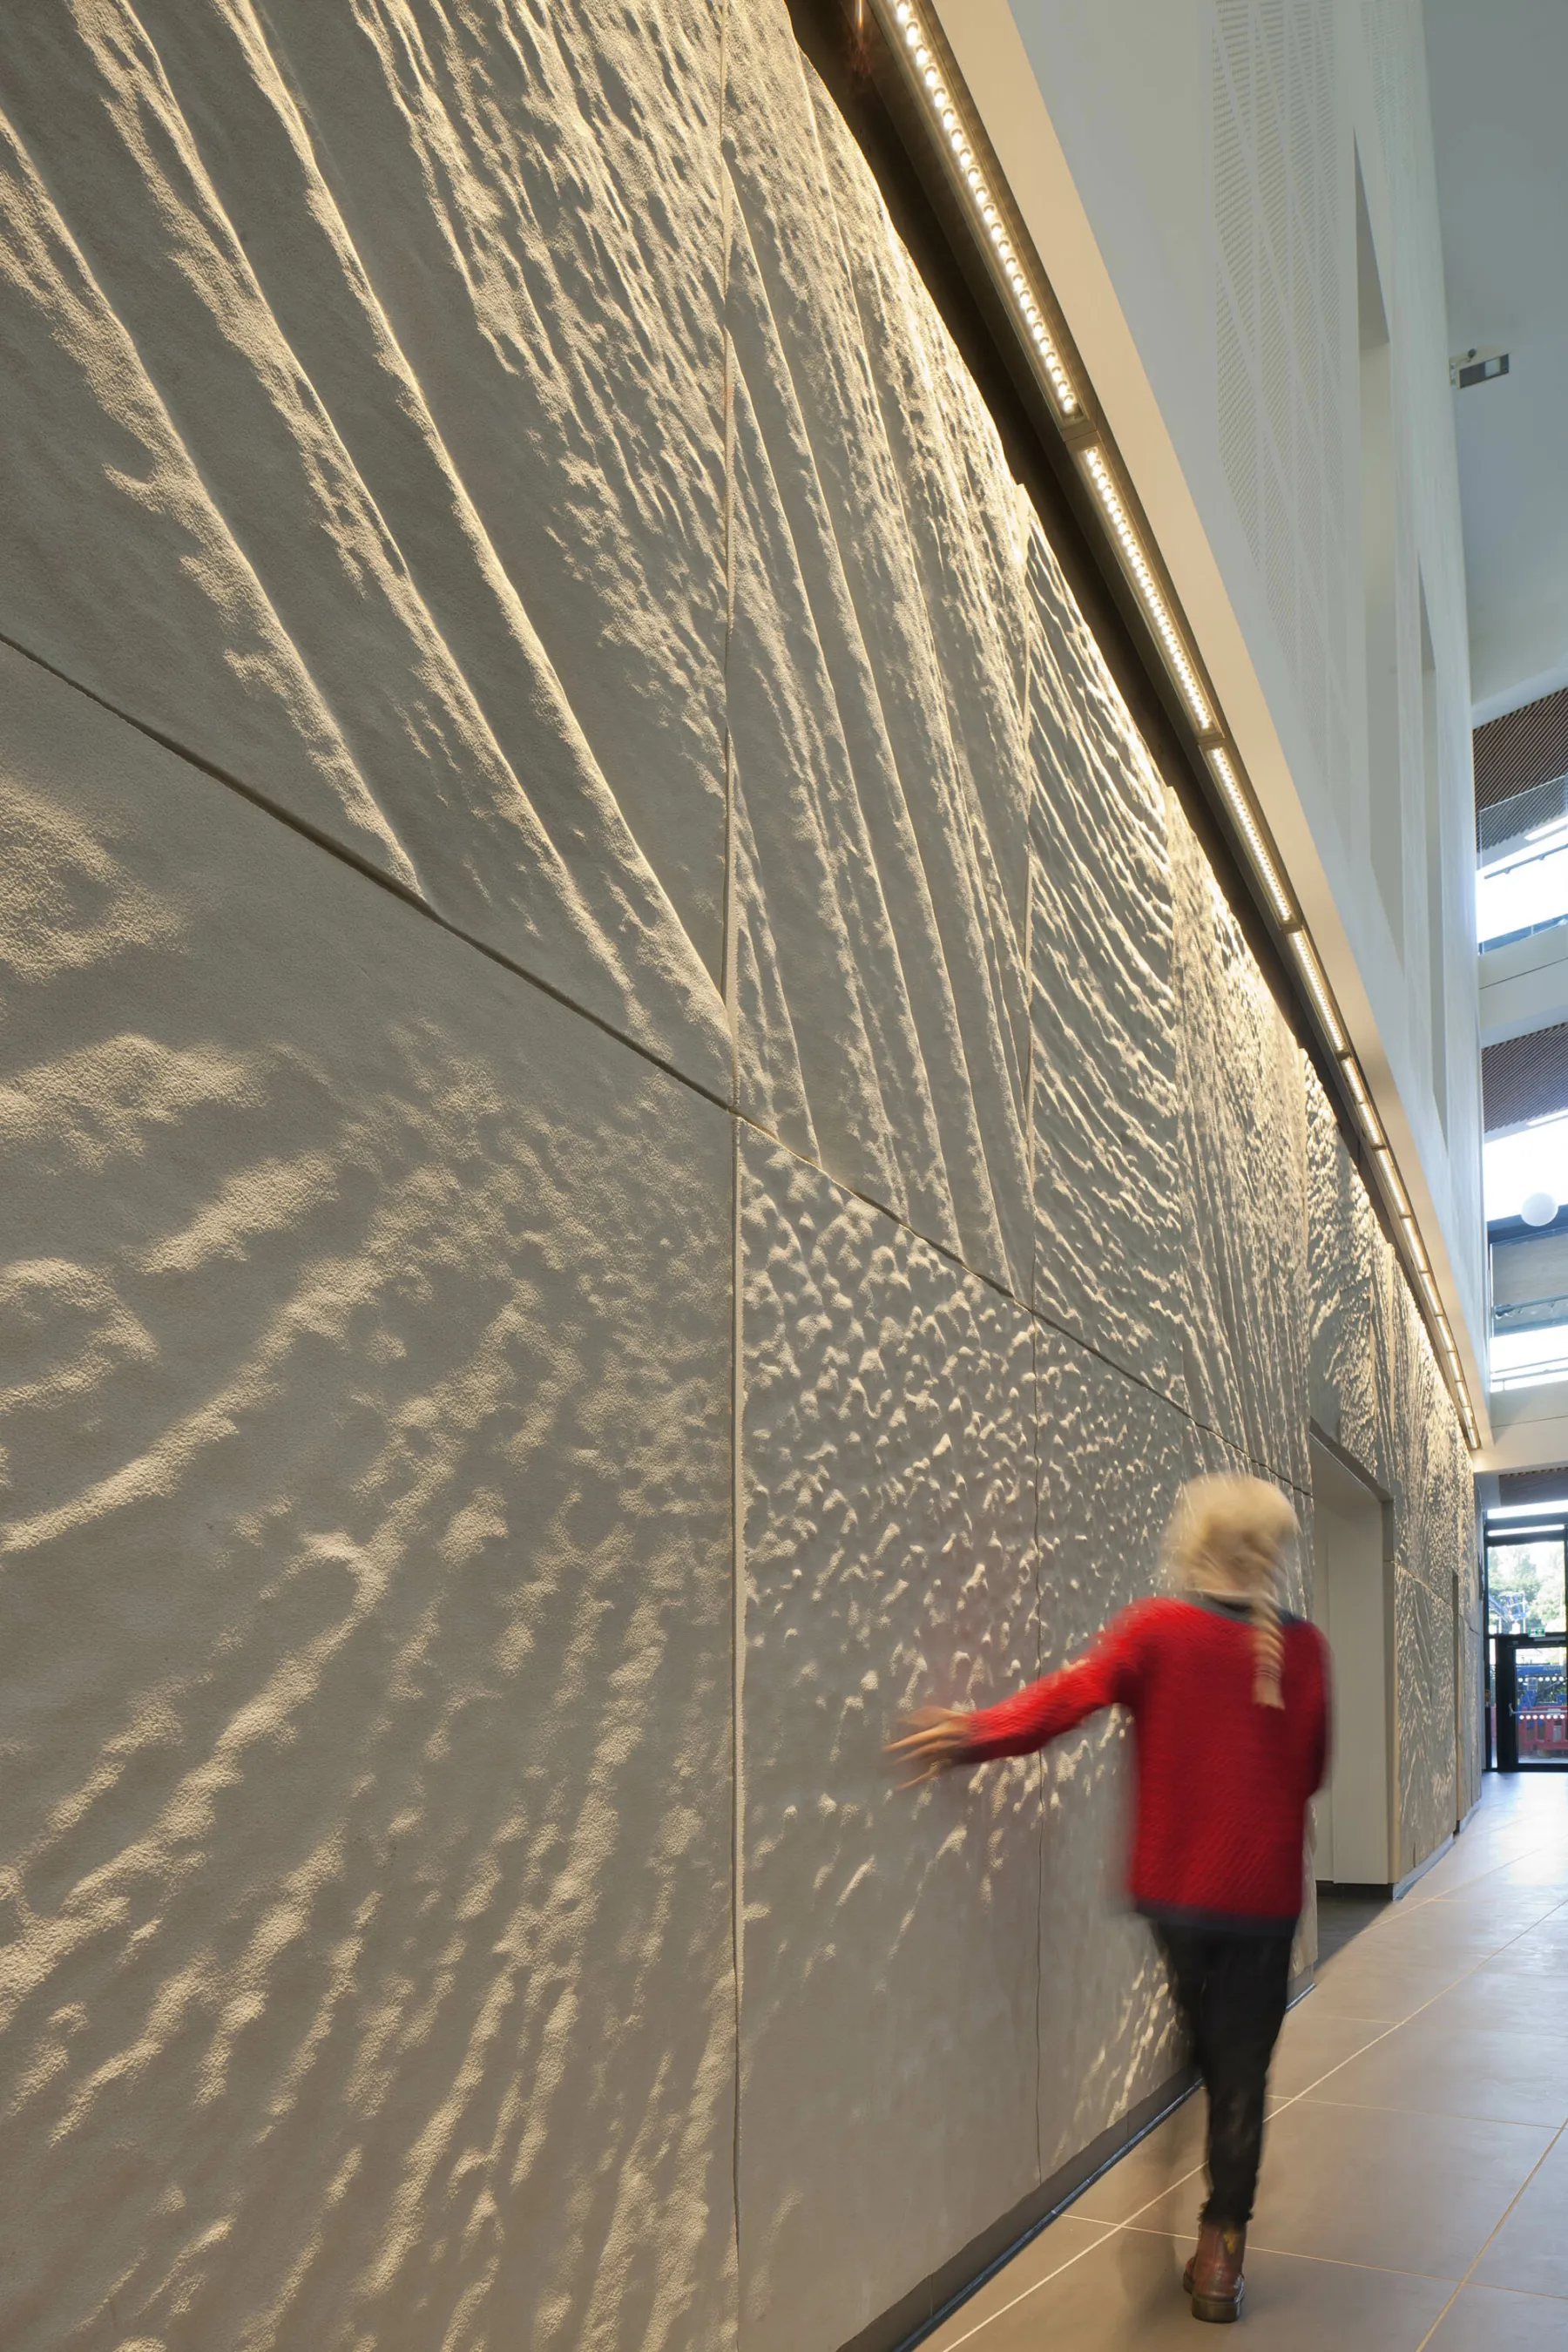 A wall is clad in a tactile sandstone-like surface - which has the appearance of a fossilised sea bed. A young girl walks past running her hand over it.